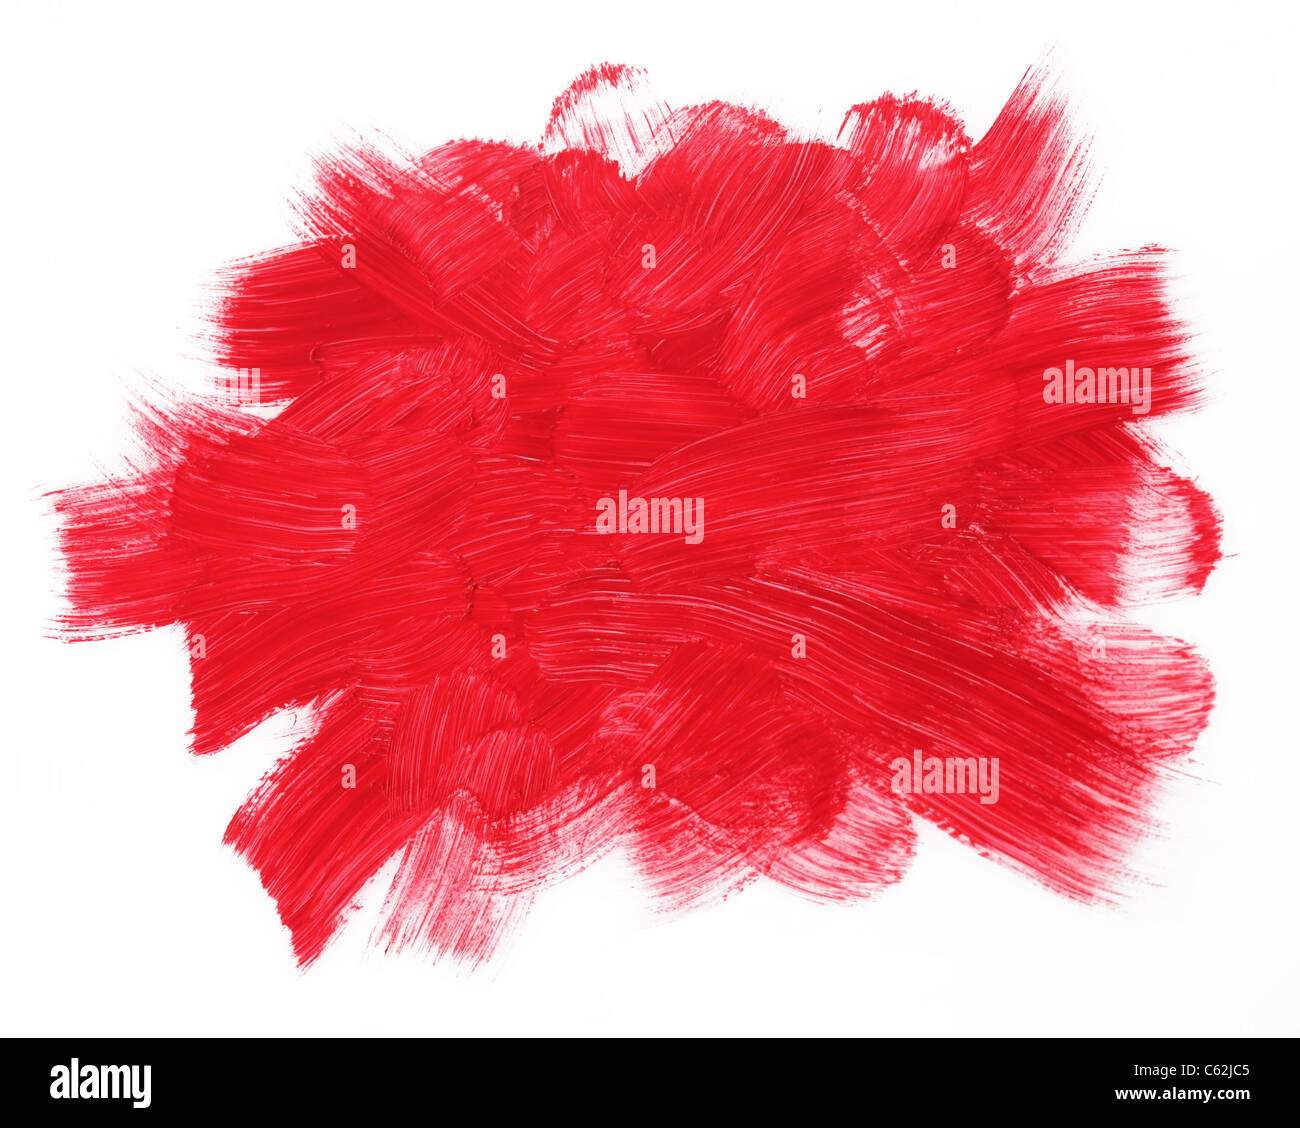 Red brushstrokes isolated on a white background. Stock Photo